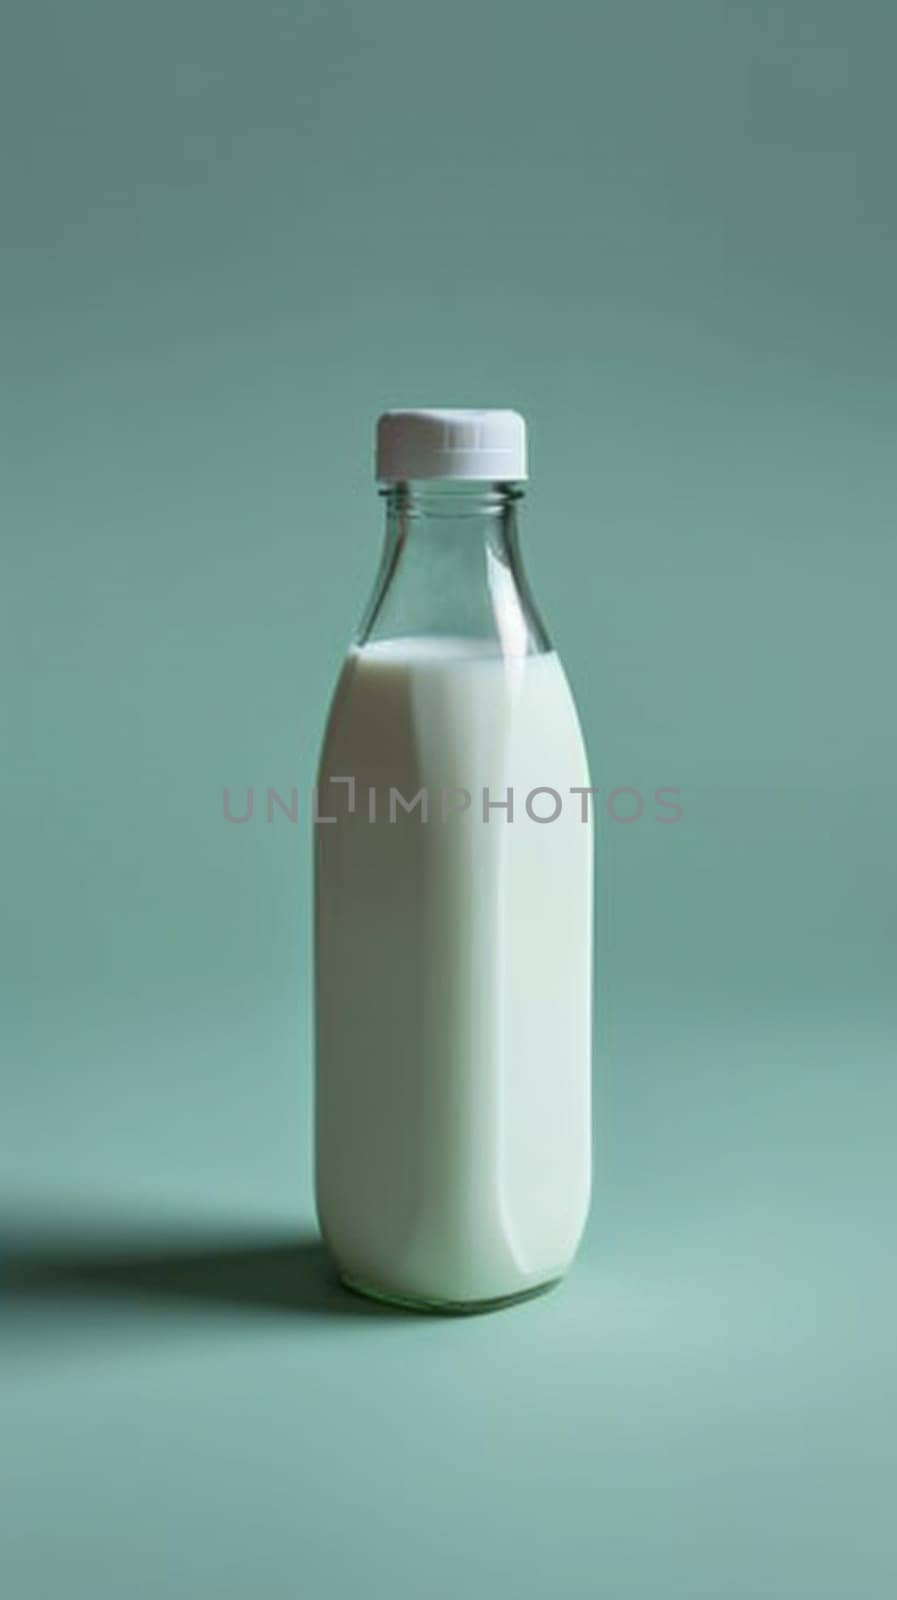 A glass bottle of milk on a green background